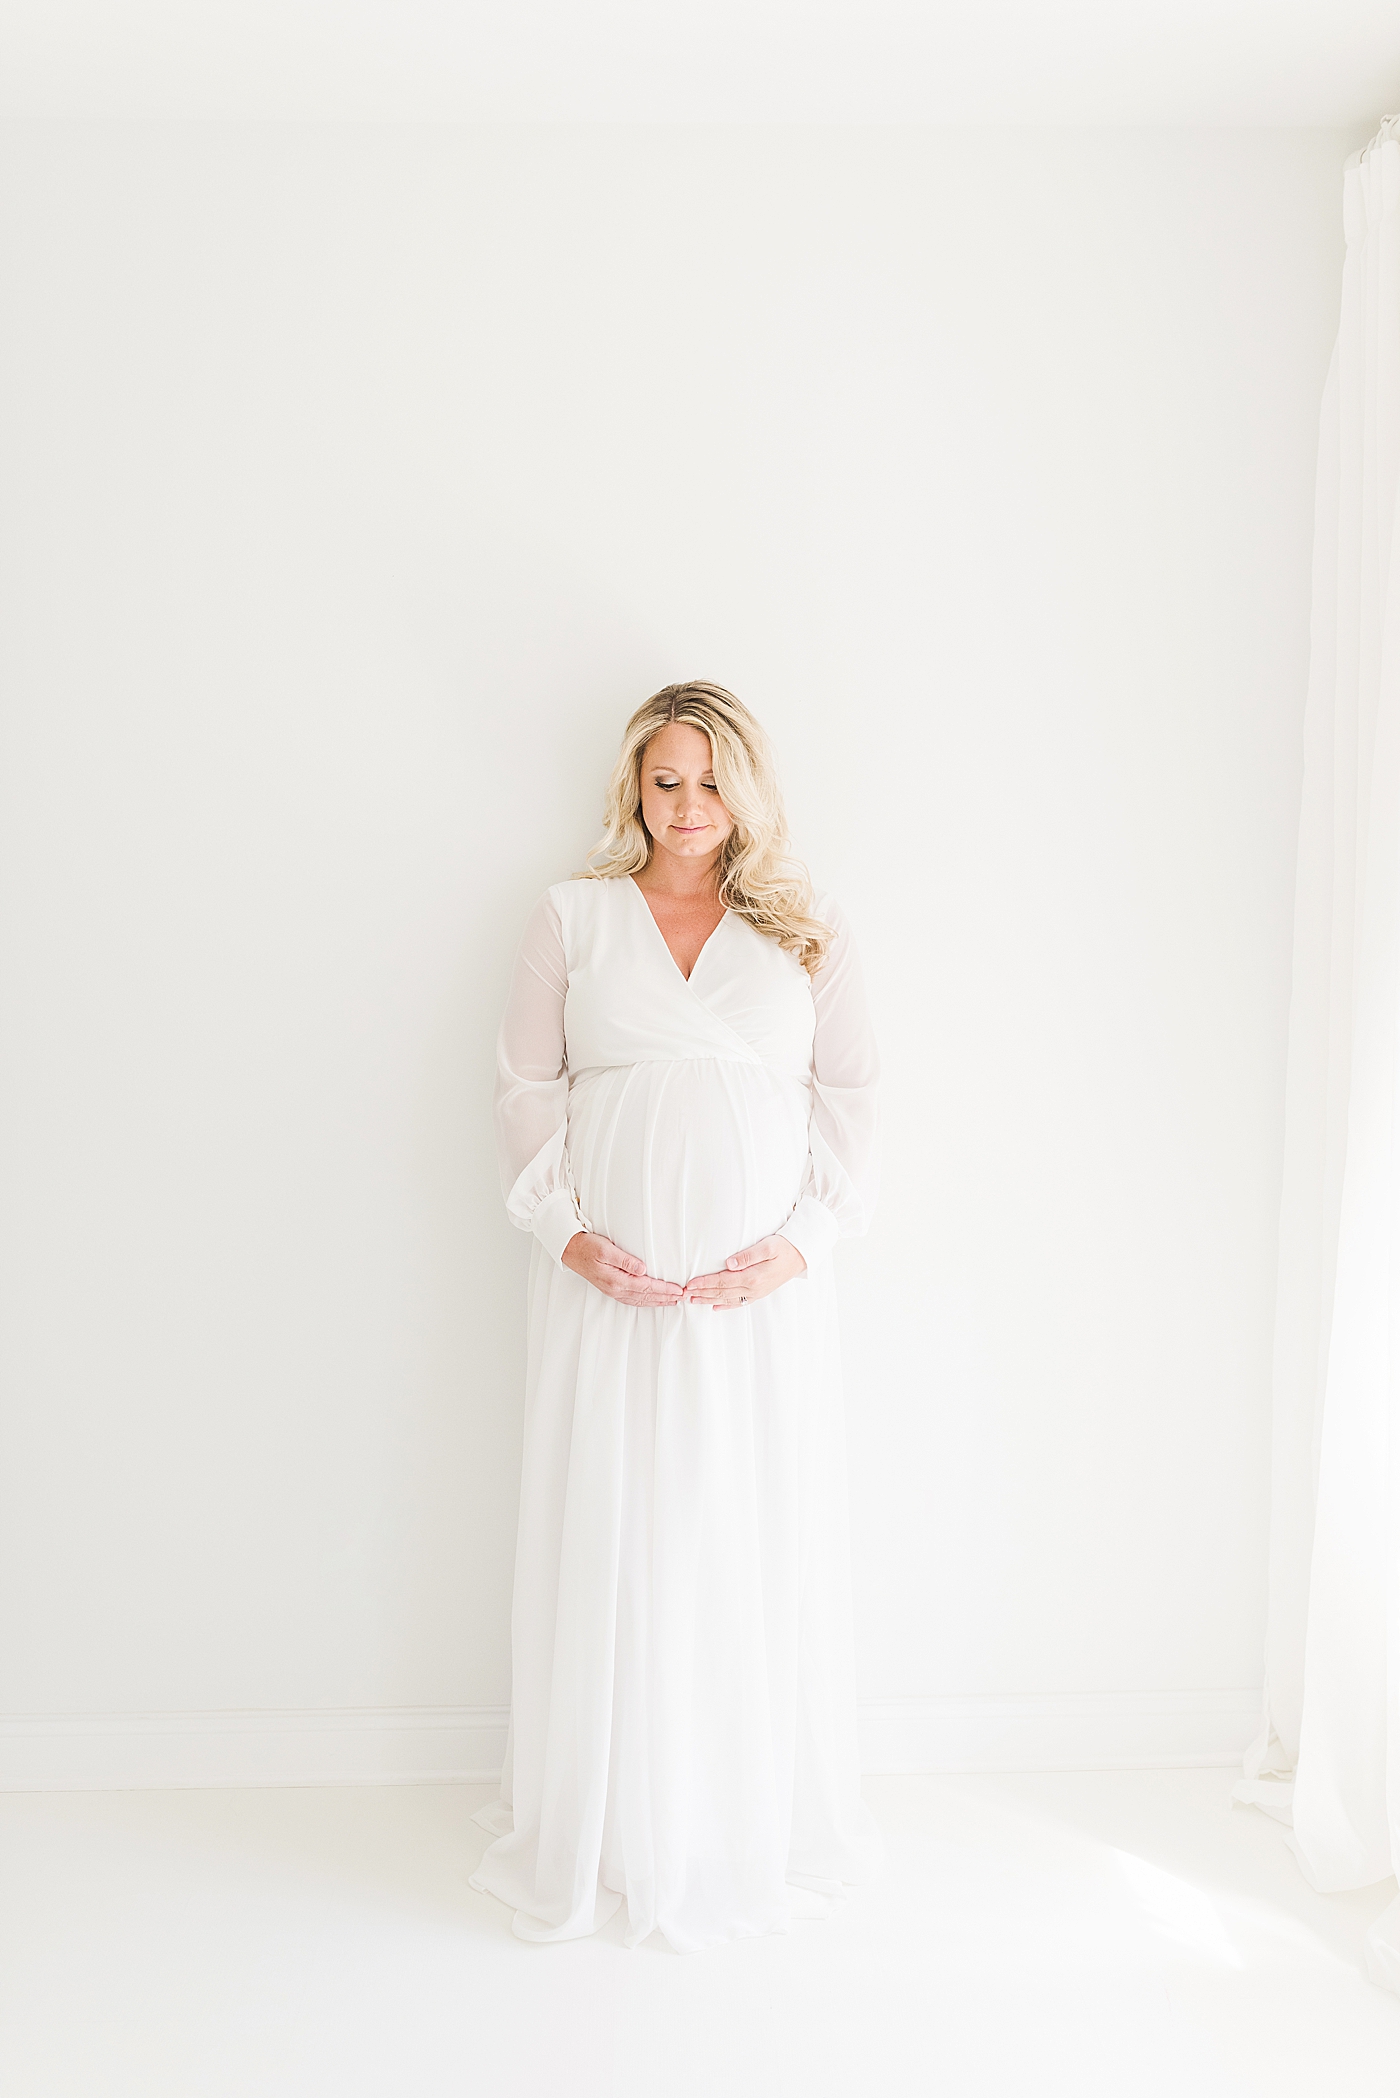 Mother to be in white dress | Photo by Anna Wisjo Photography